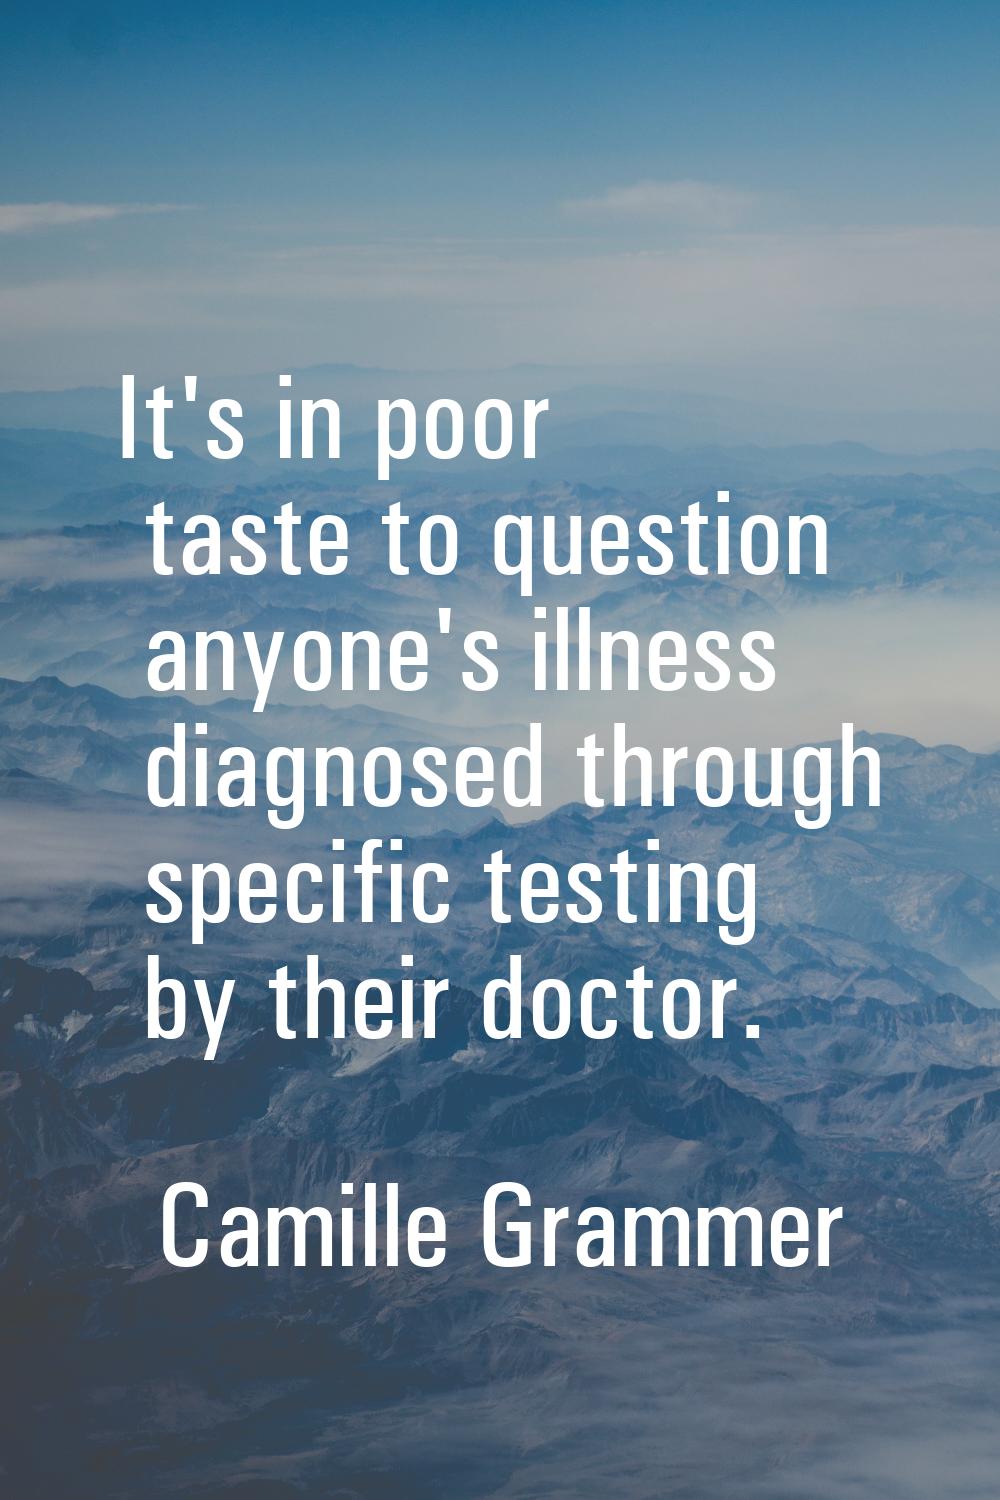 It's in poor taste to question anyone's illness diagnosed through specific testing by their doctor.